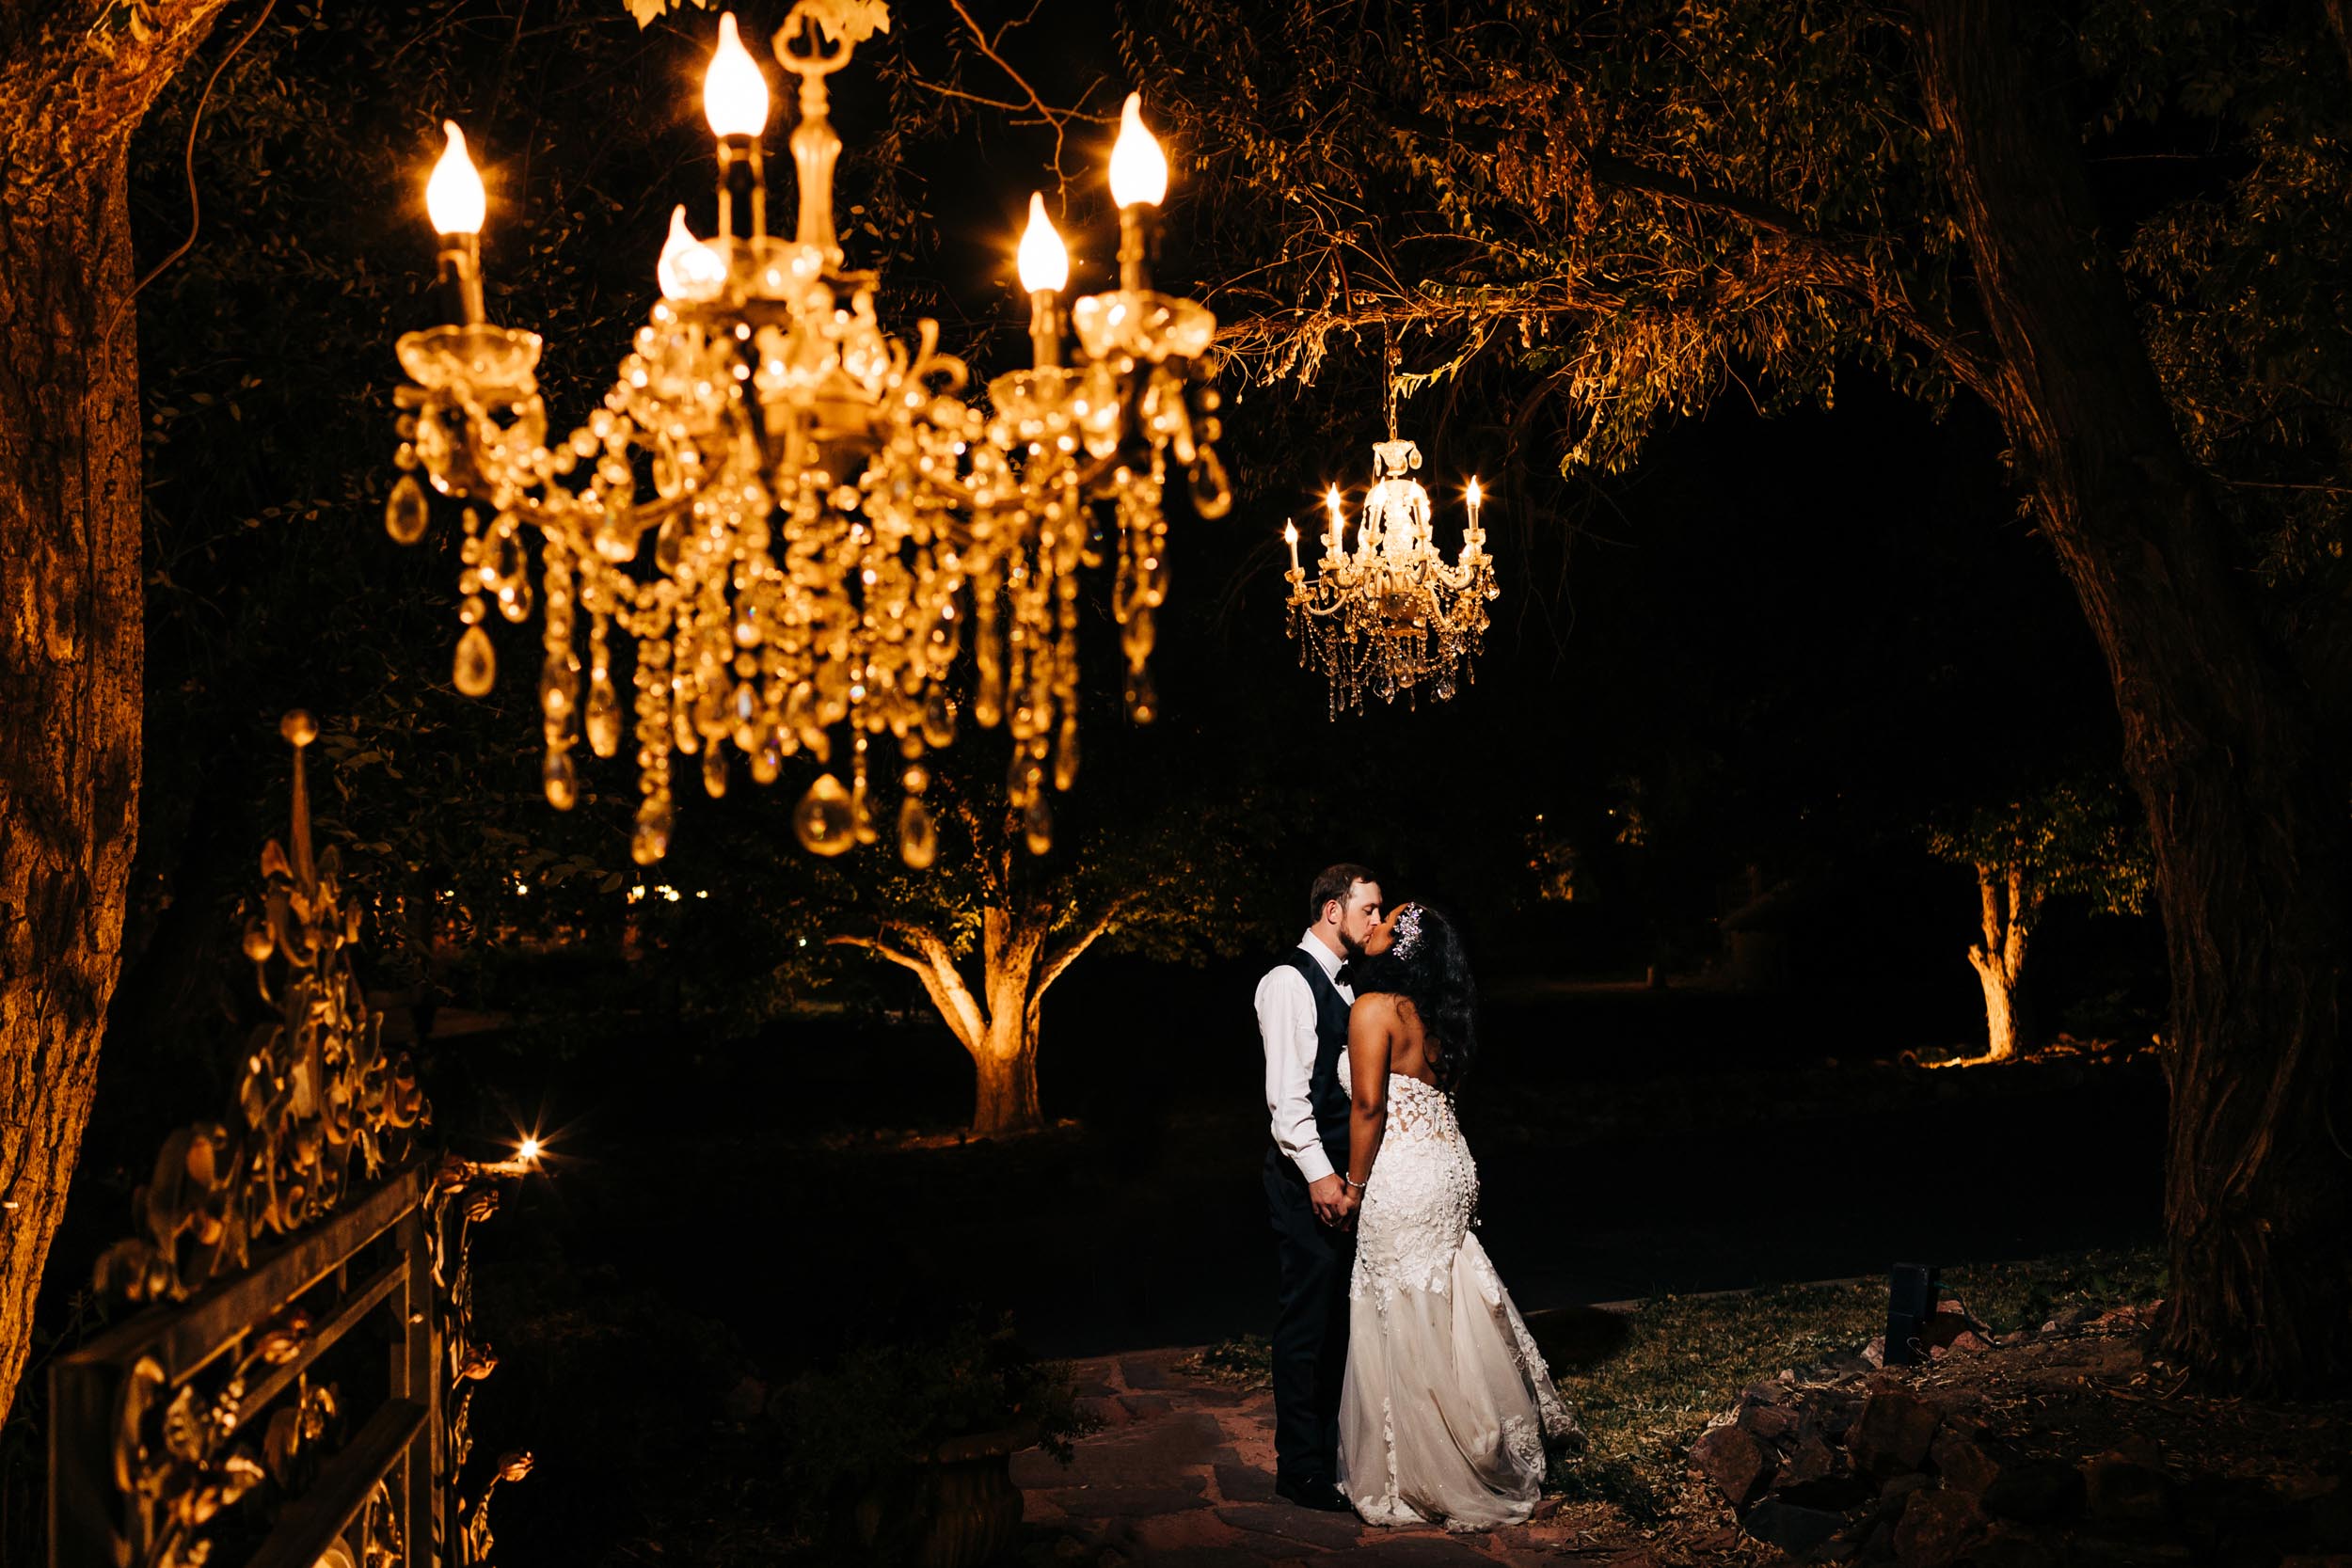 lionsgate event center wedding portrait of couple at night outside by the chandeliers